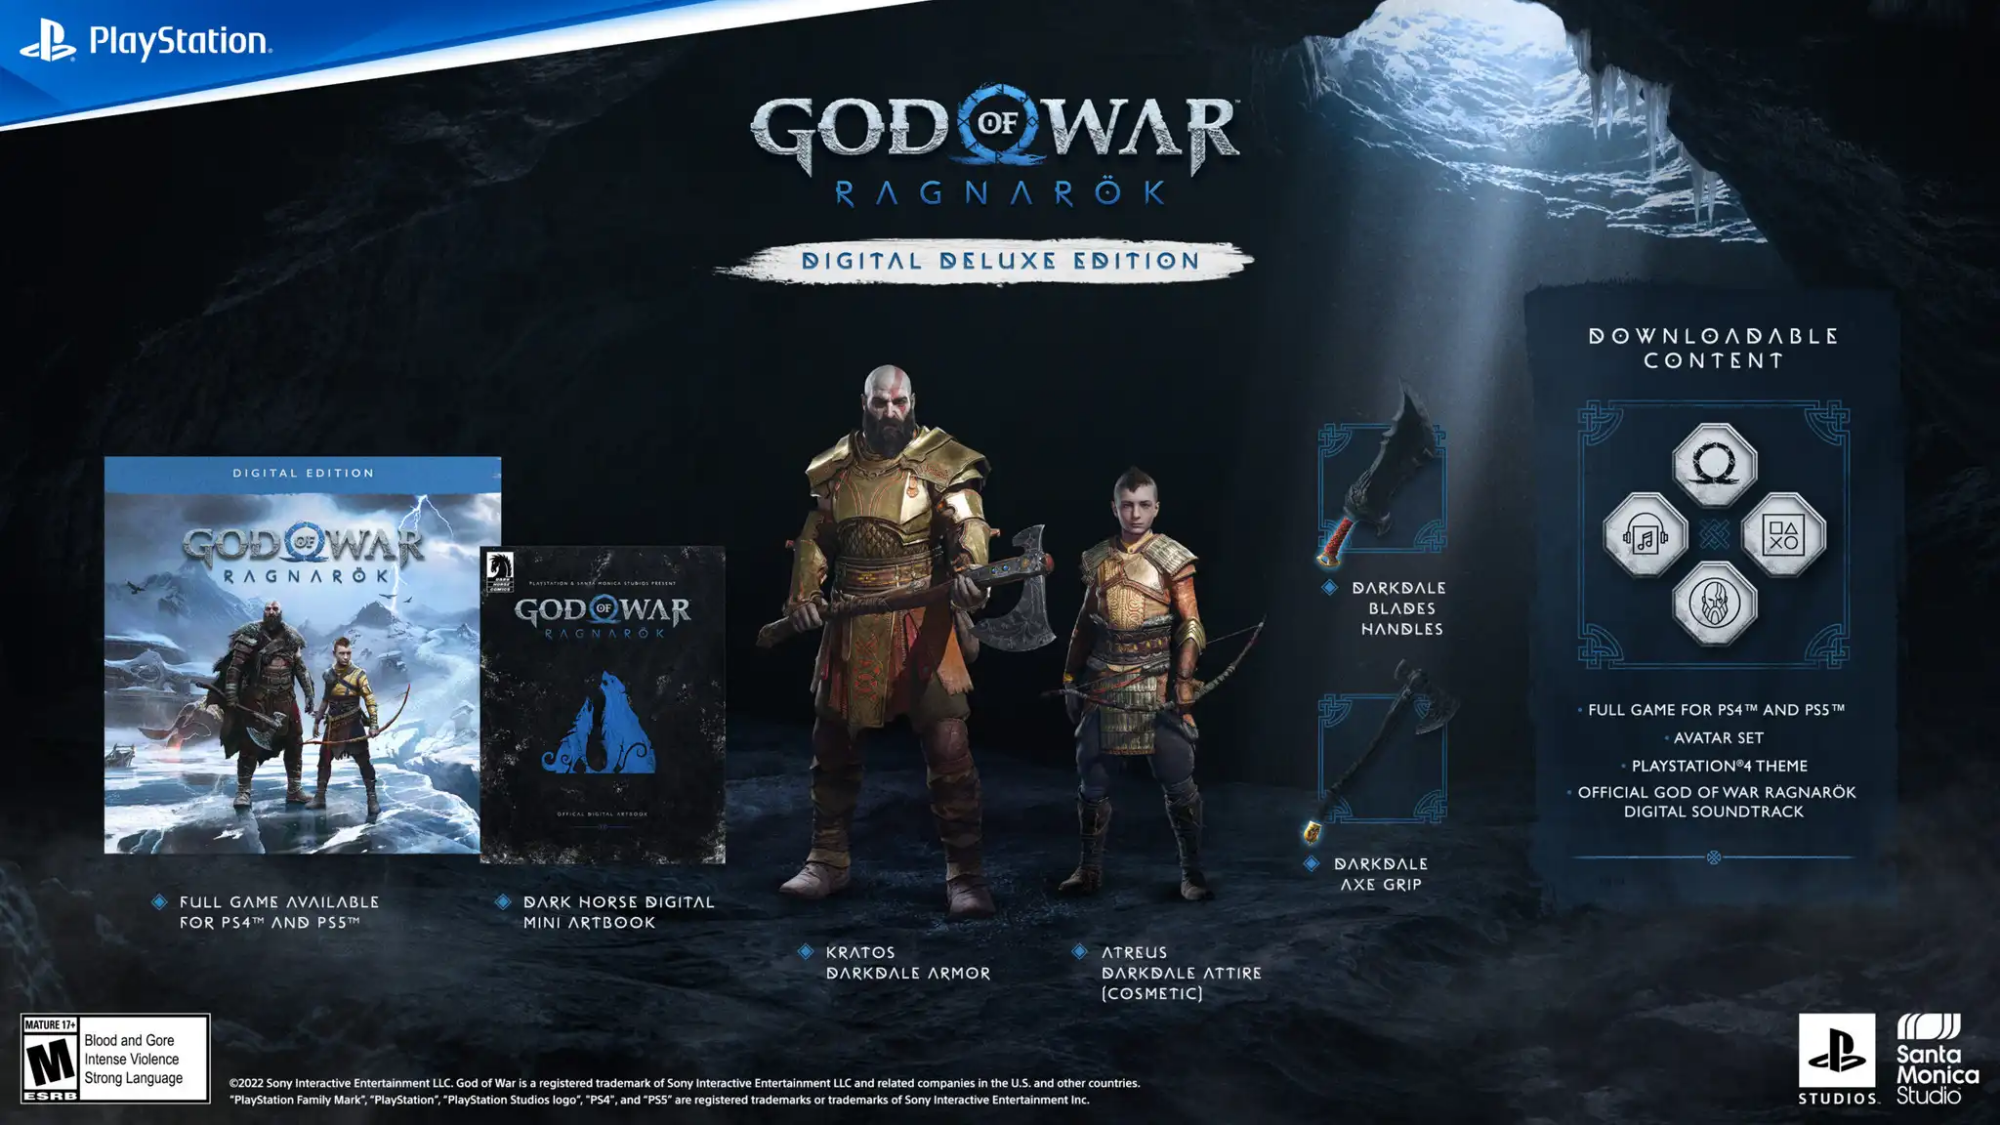 a preview of the bonuses included with "god of war ragnarok" digital deluxe edition